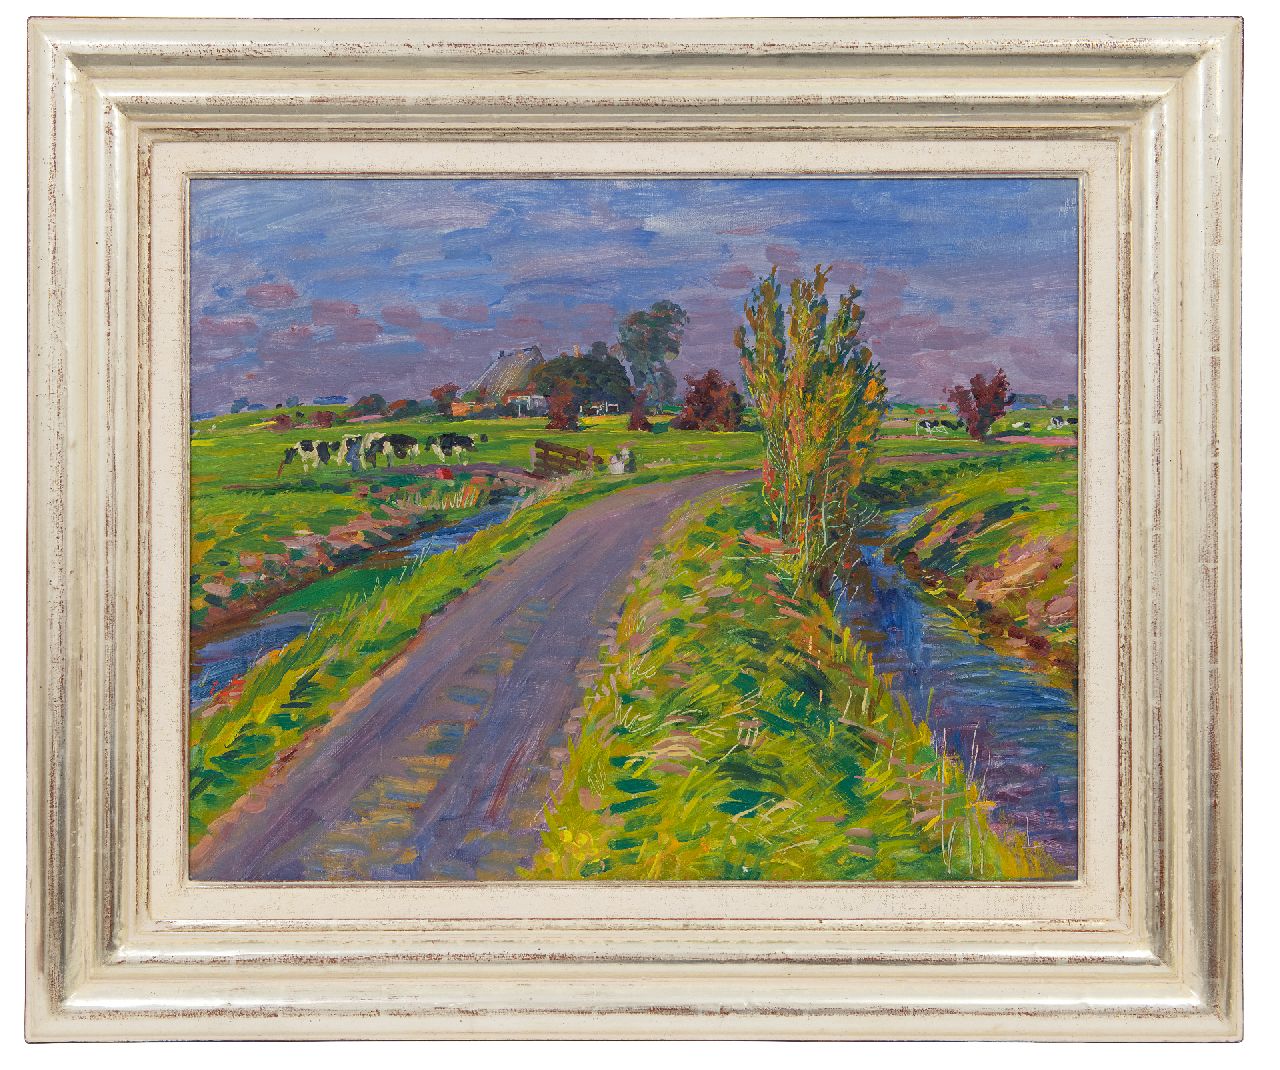 Dijkstra J.  | Johannes 'Johan' Dijkstra | Paintings offered for sale | Farmhouse on the Paddepoelsterweg near Wierumerschouw; on the reverse: Farm on a countryroad, oil on canvas 52.4 x 66.0 cm, painted ca. 1930